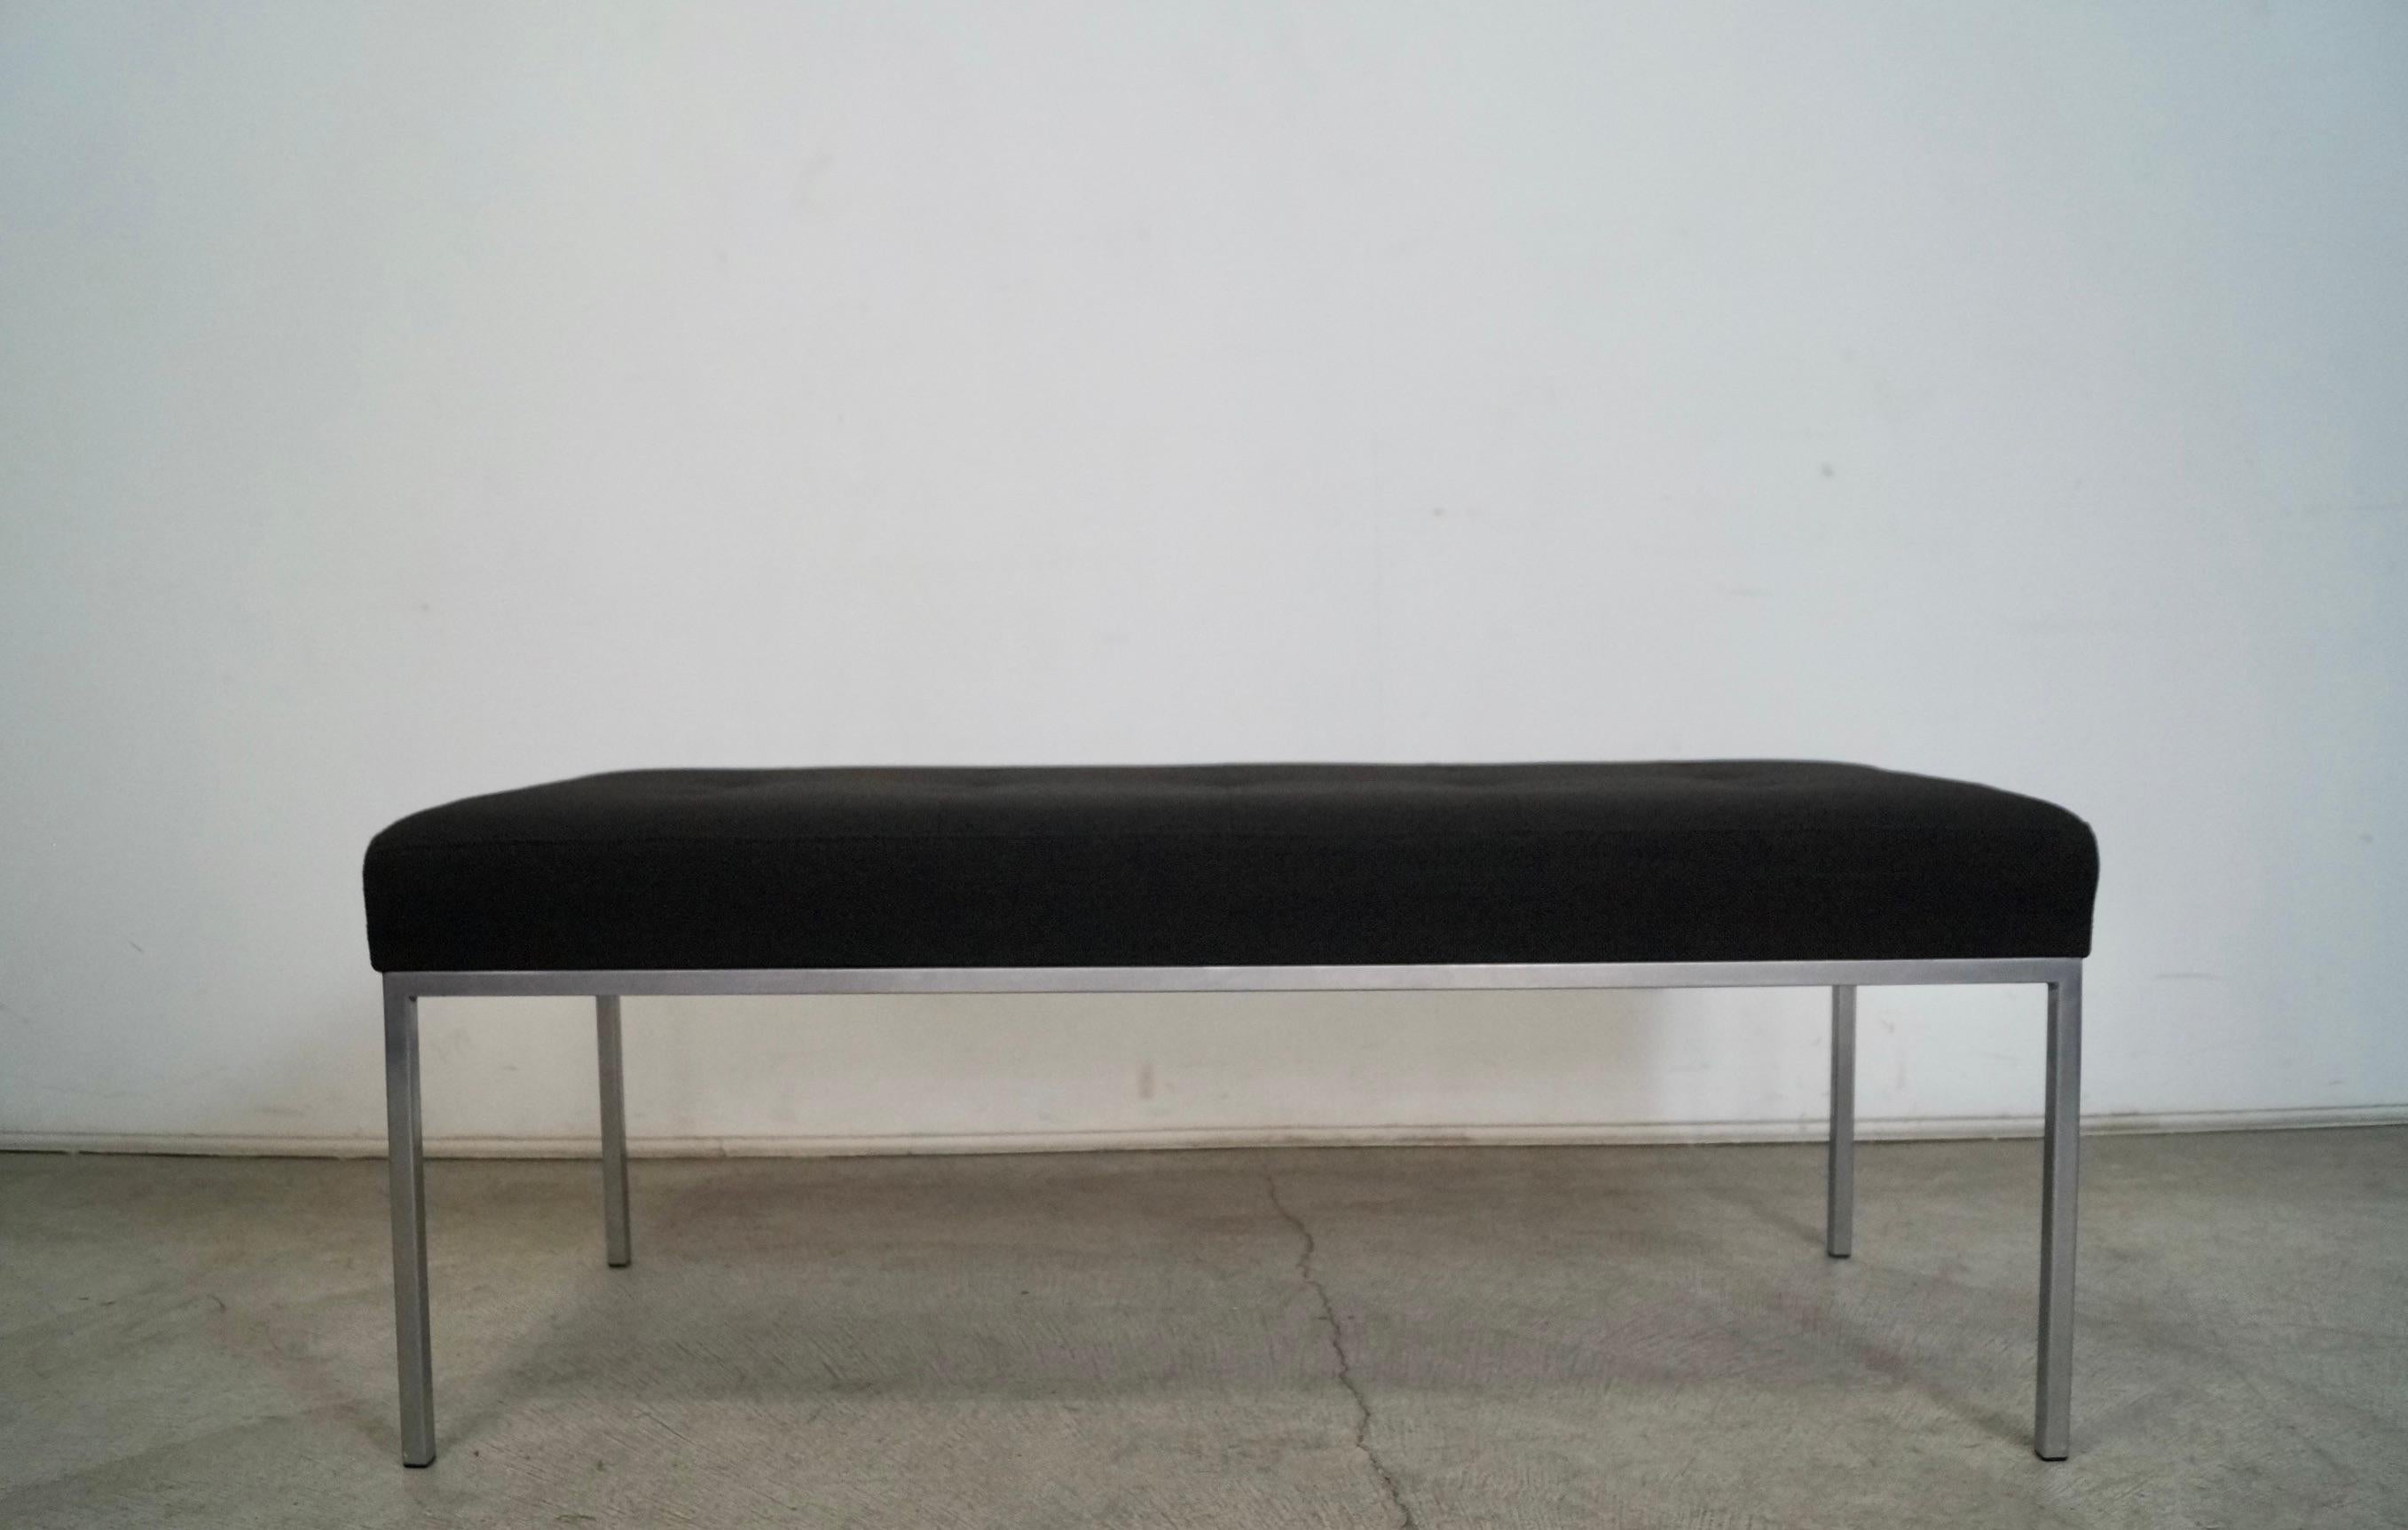 Vintage original Midcentury Modern bench for sale. Knoll style with an aluminum frame and reupholstered in new Knoll style black tweed and foam. It's stitch tufted and very elegant. Beautiful accent bench that would look great in a home or office.